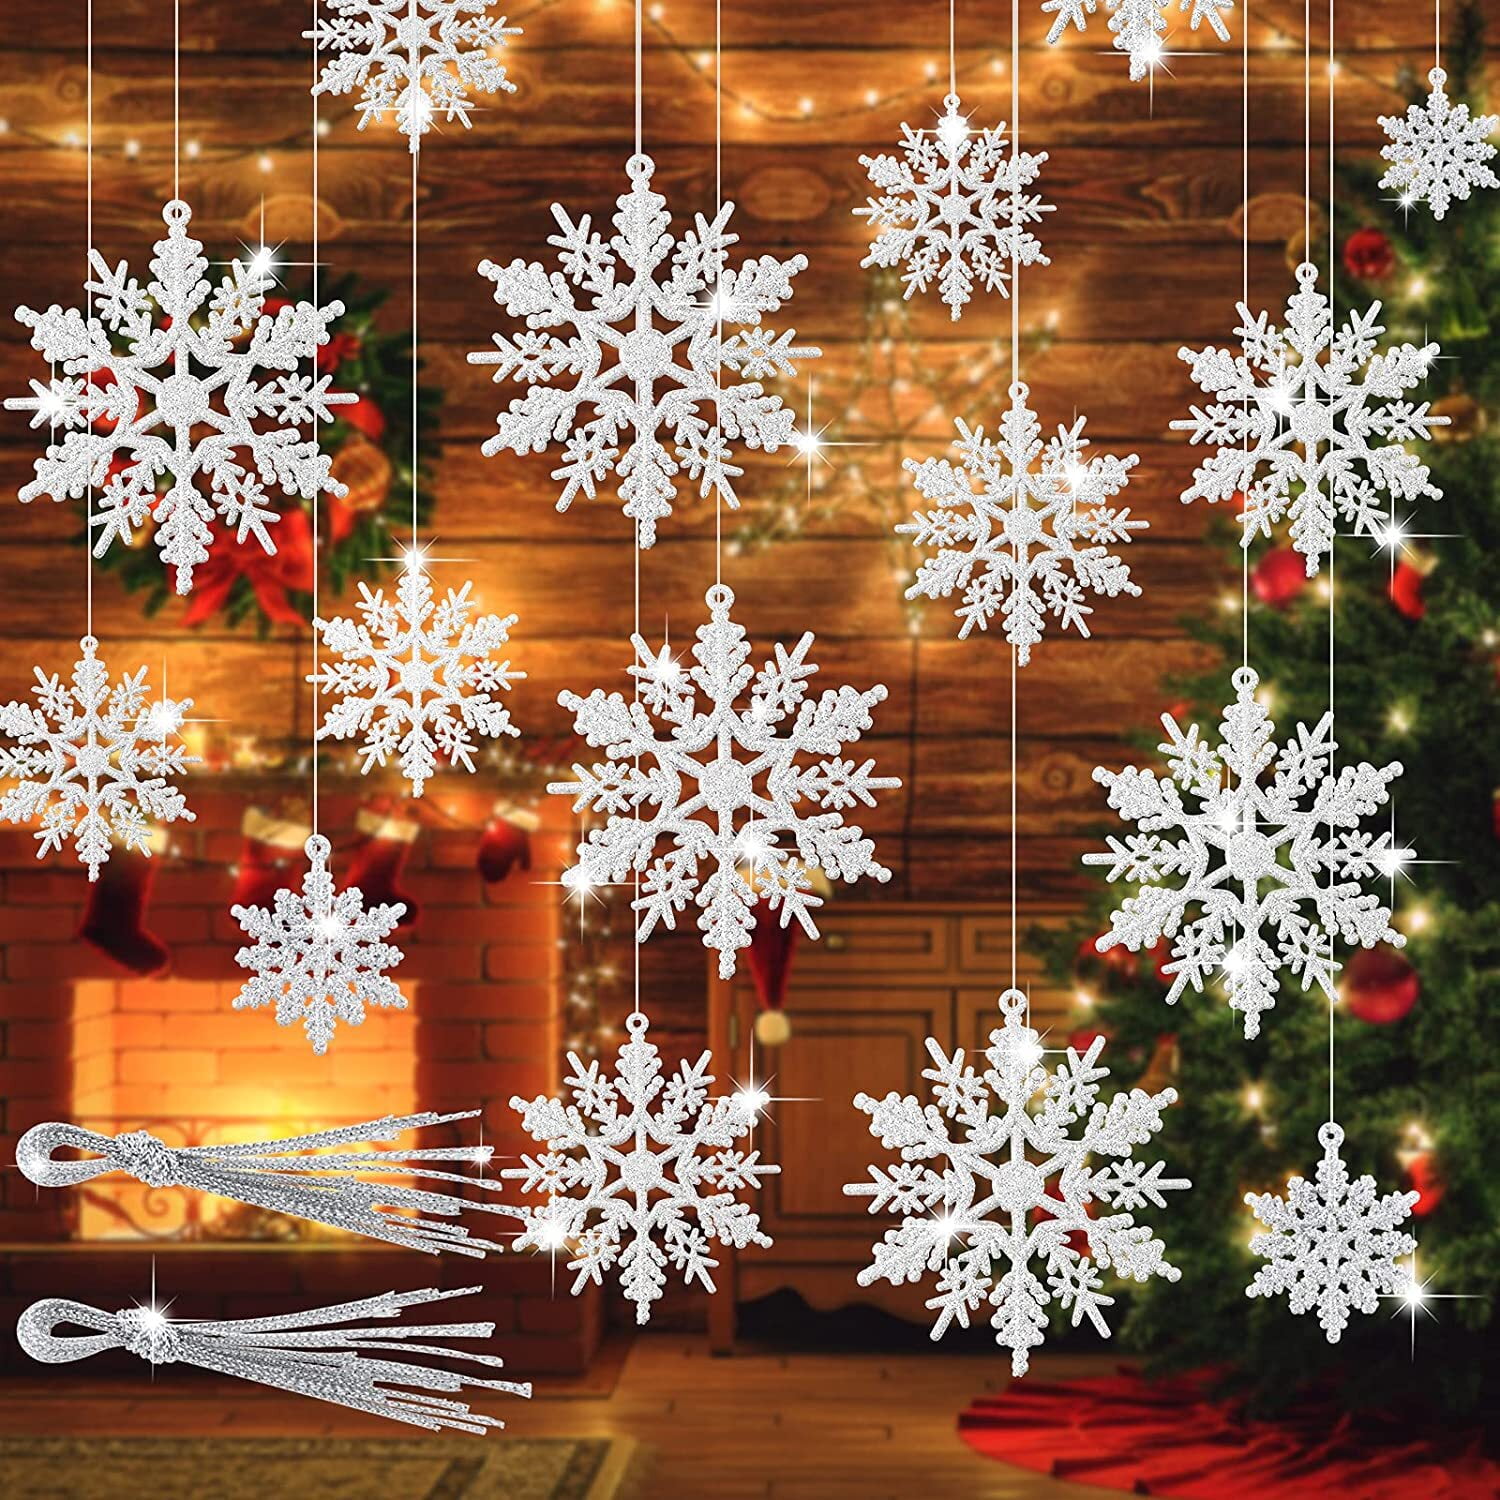 Hanging Snowflake Decorations Value Pack